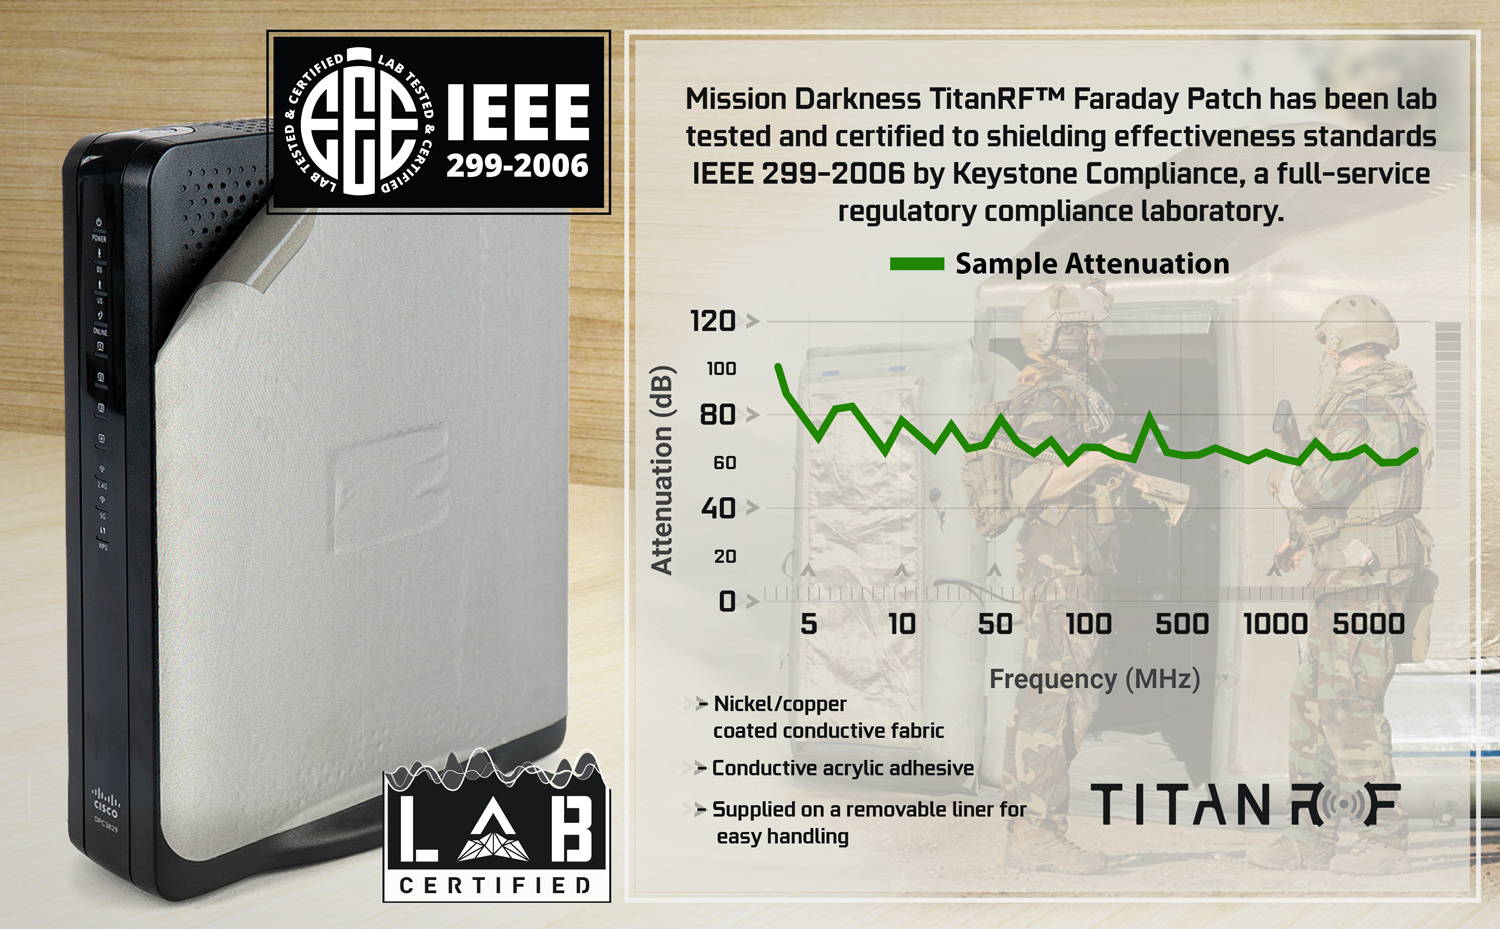 Mission Darkness TitanRF Faraday Patch conductive adhesive lab tested and certified IEEE 299-2006